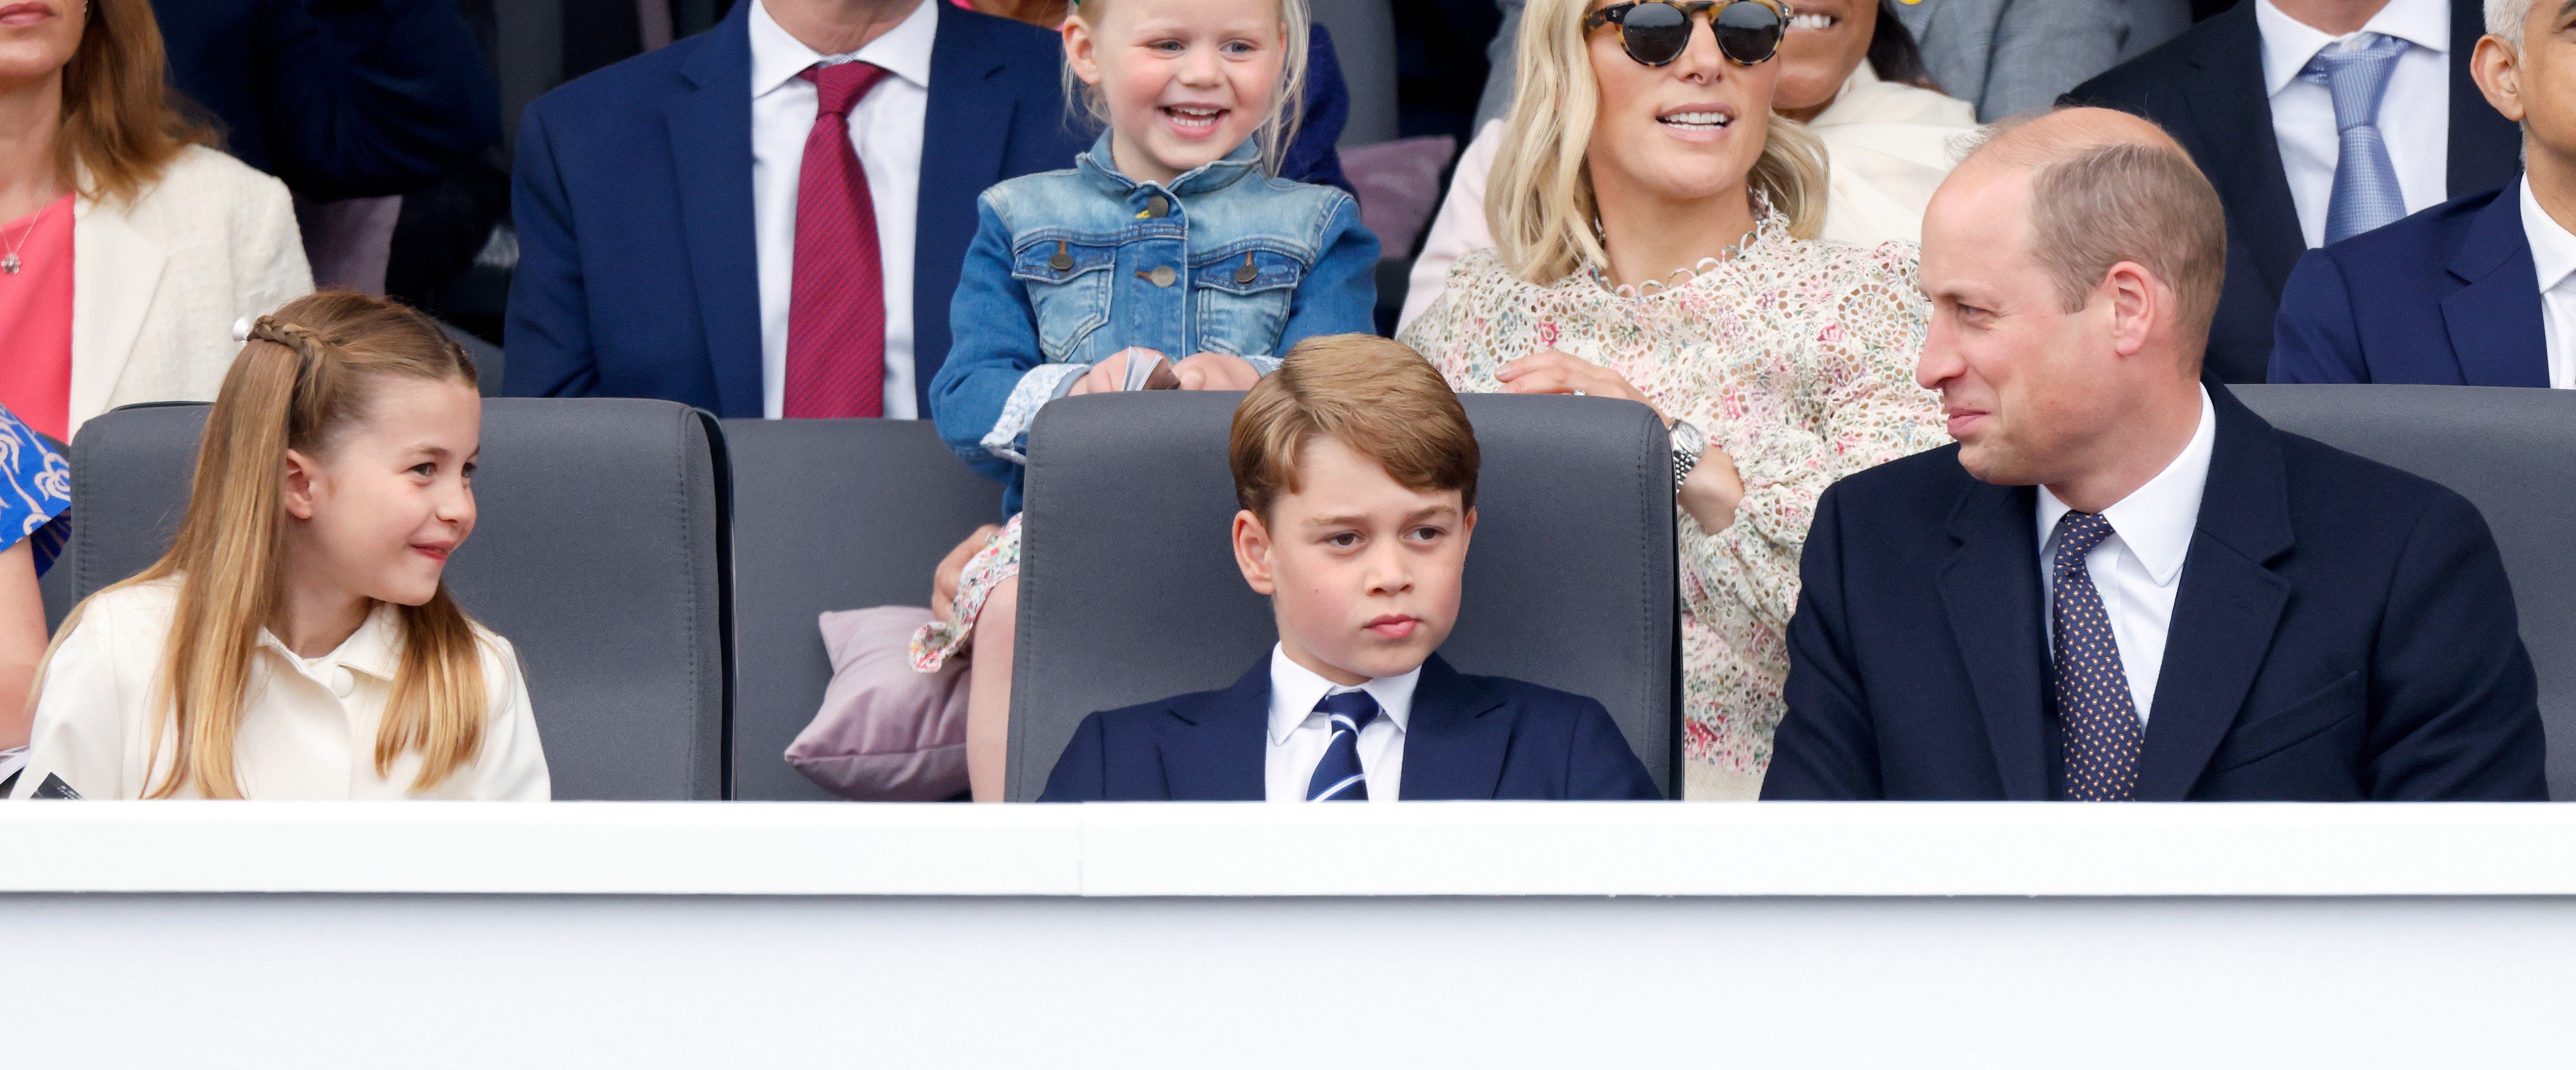 Photo of Prince George, as well as Princess Charlotte and Prince William who look alike in throwback photos, watching the Platinum Pageant during Queen Elizabeth II's Platinum Jubilee